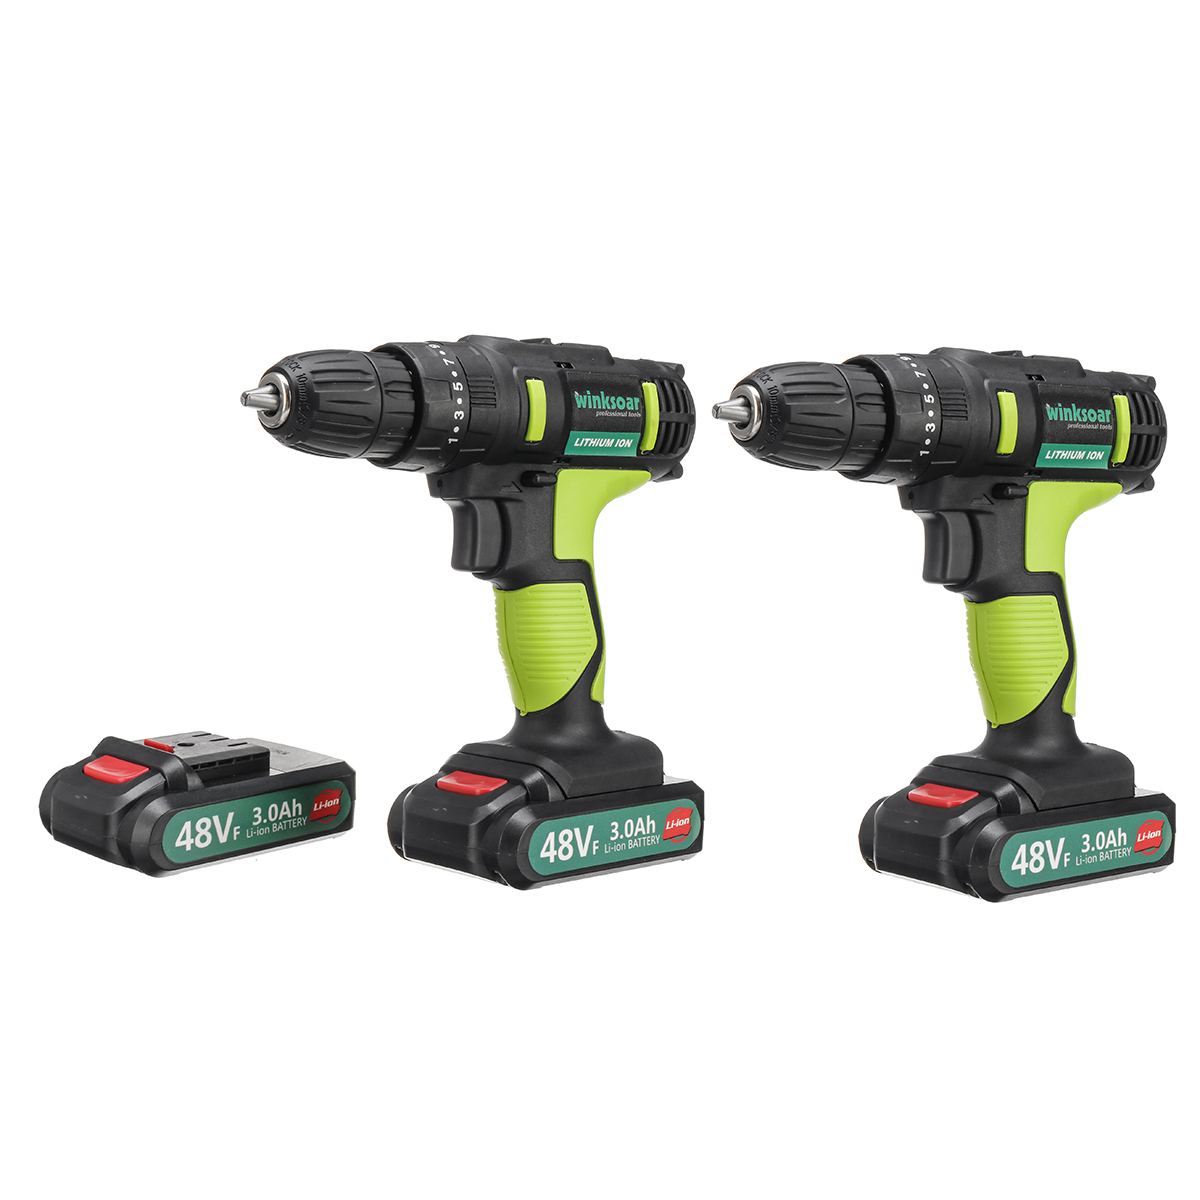 48VF-3-in-1-251-Gears-Electric-Impact-Drill-2-Speeds-Rechargeable-Screwdriver-W-LED-Light-1733392-11